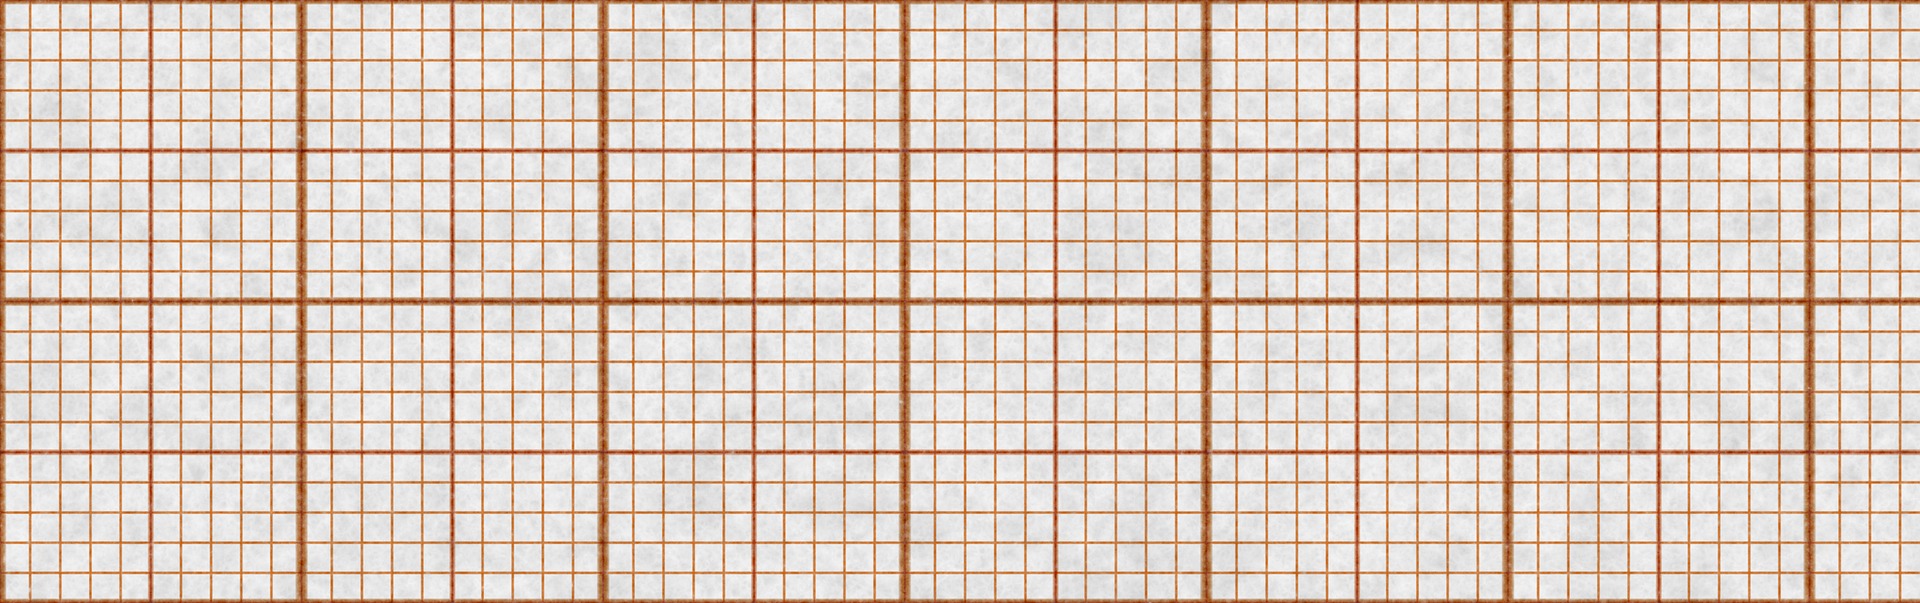 Banner Sized Graph Paper